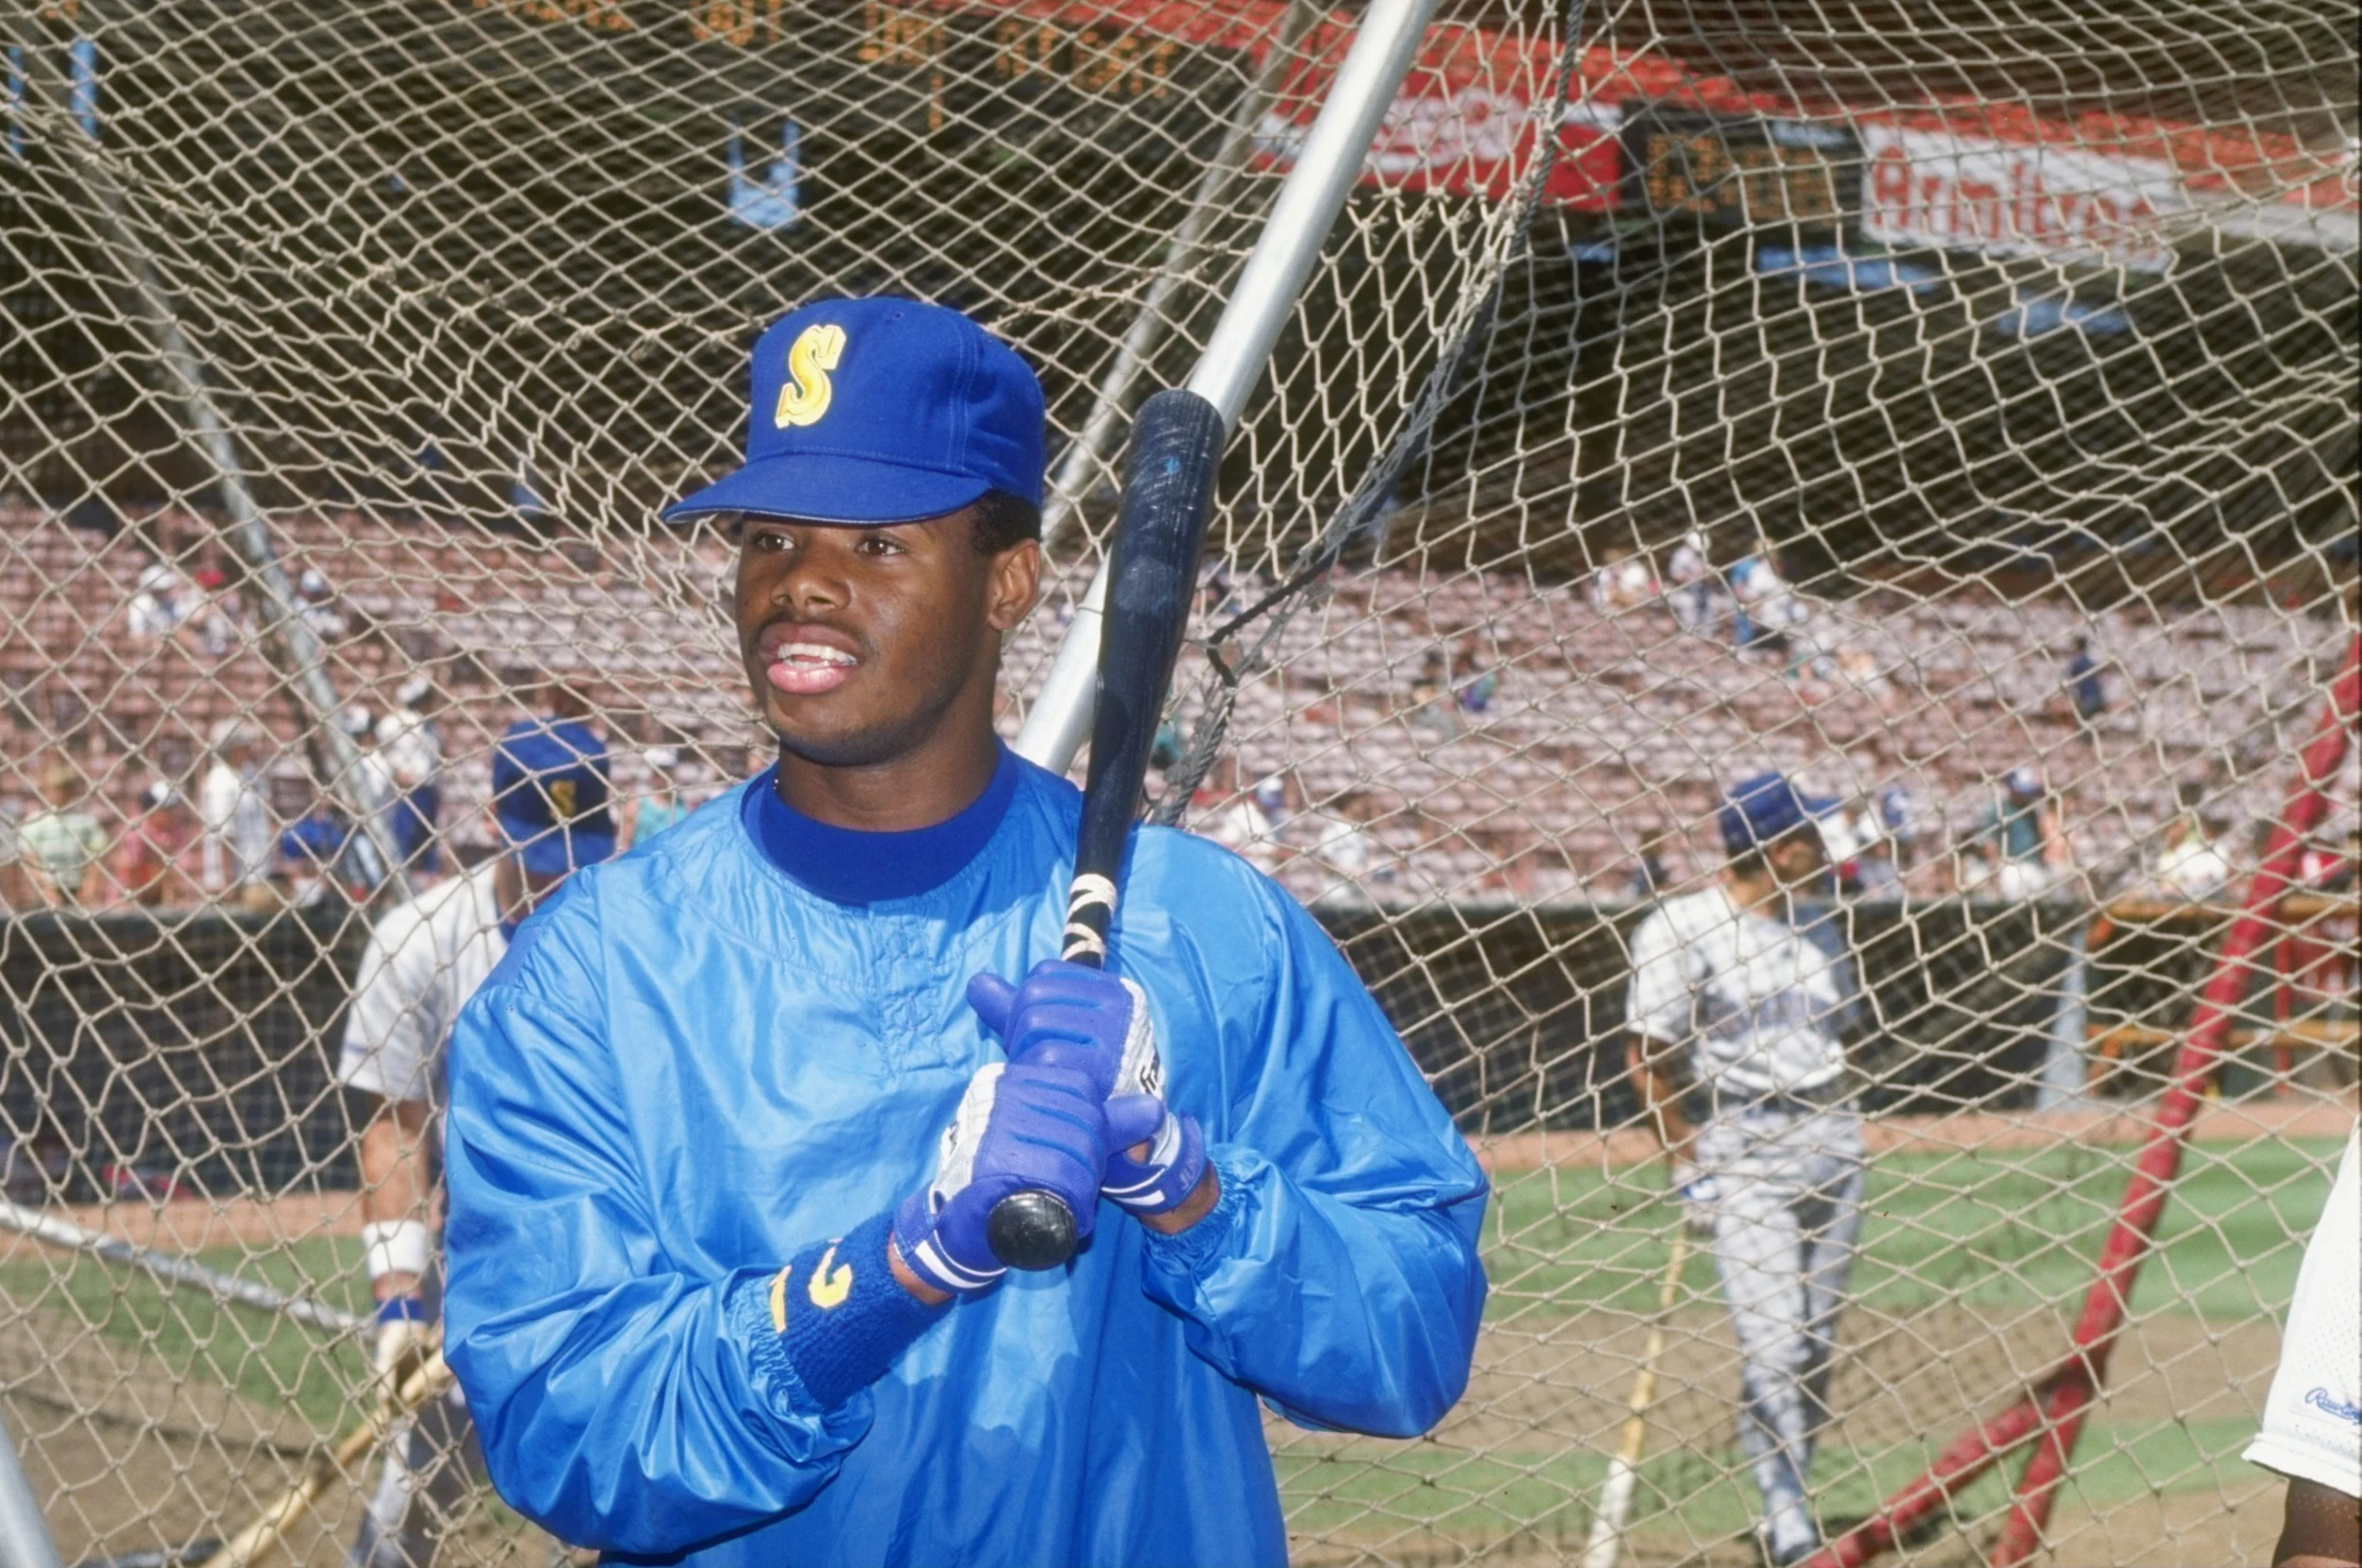 How Ken Griffey Jr.'s mad dash home in 1995 saved baseball in Seattle --  and ignited a Yankees dynasty - ESPN